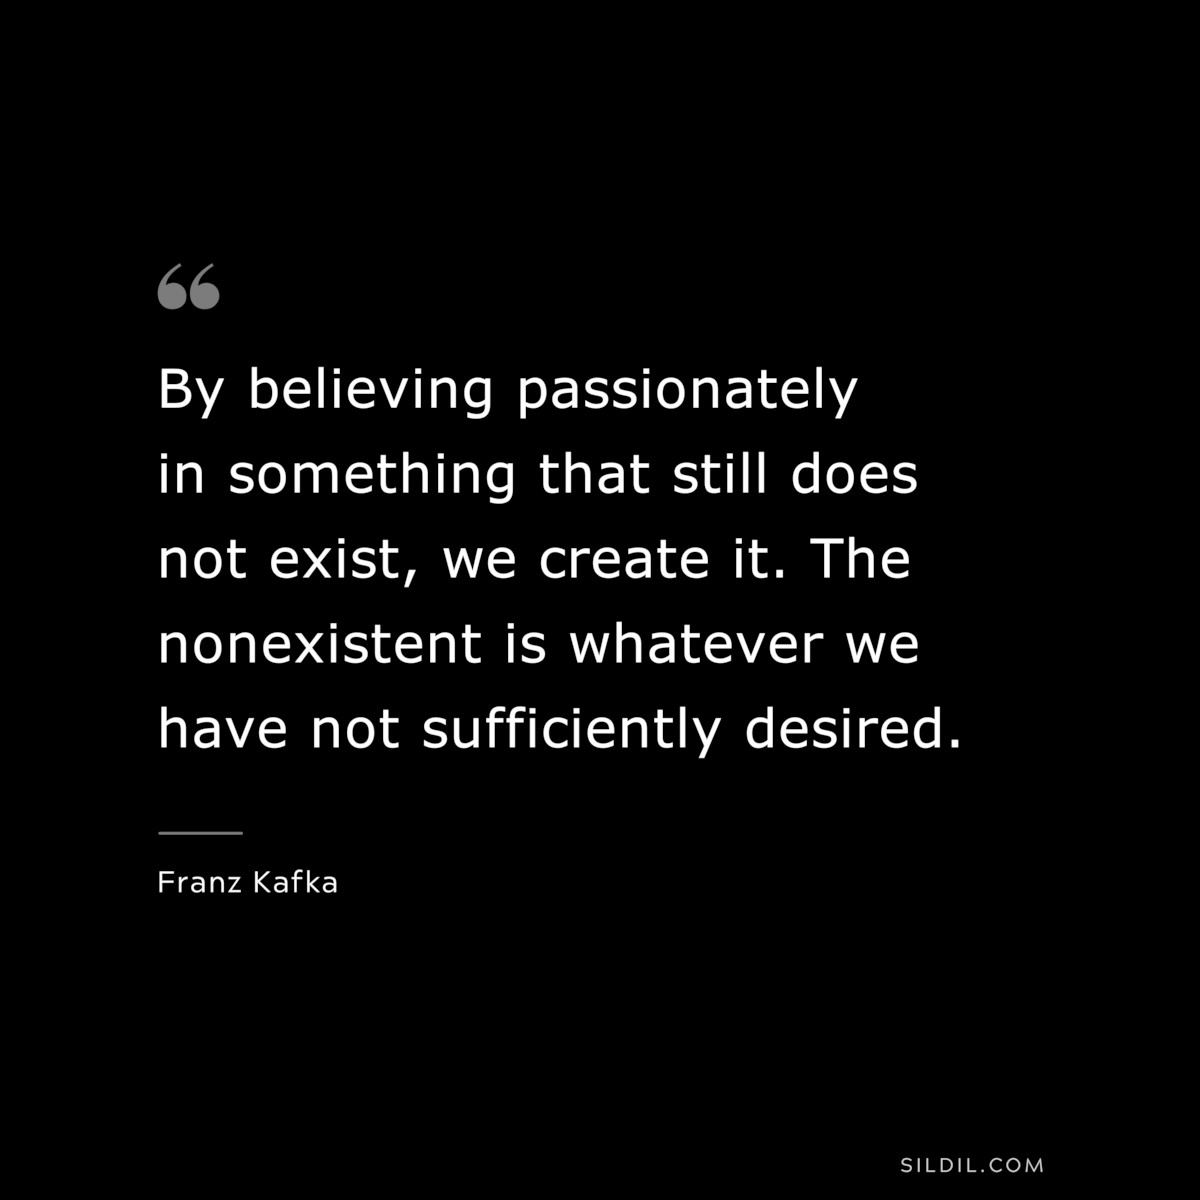 By believing passionately in something that still does not exist, we create it. The nonexistent is whatever we have not sufficiently desired. ― Franz Kafka